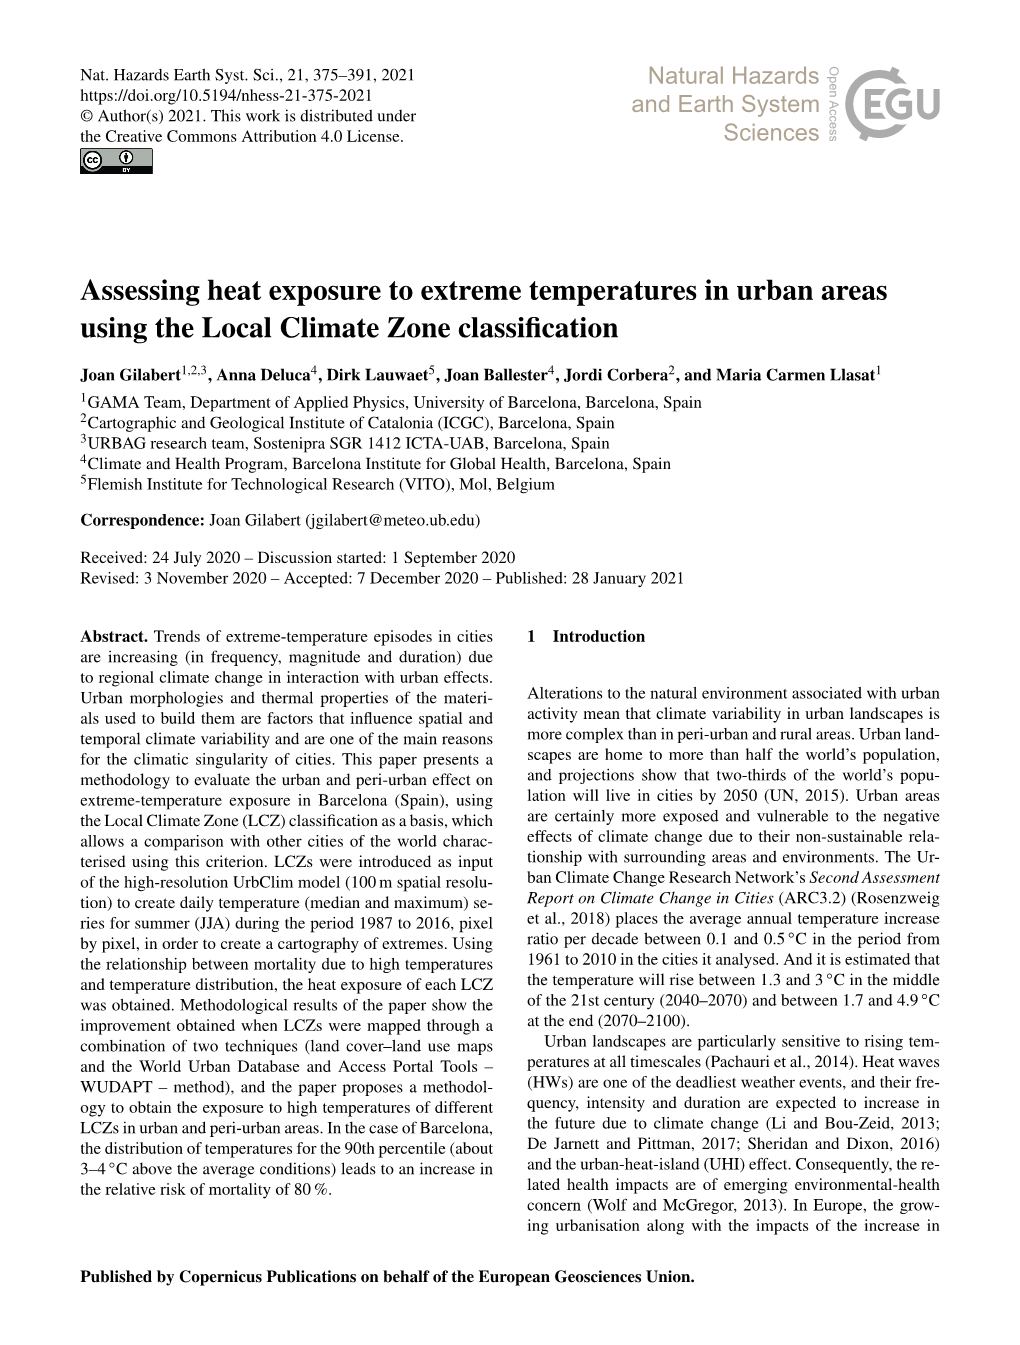 Assessing Heat Exposure to Extreme Temperatures in Urban Areas Using the Local Climate Zone Classiﬁcation